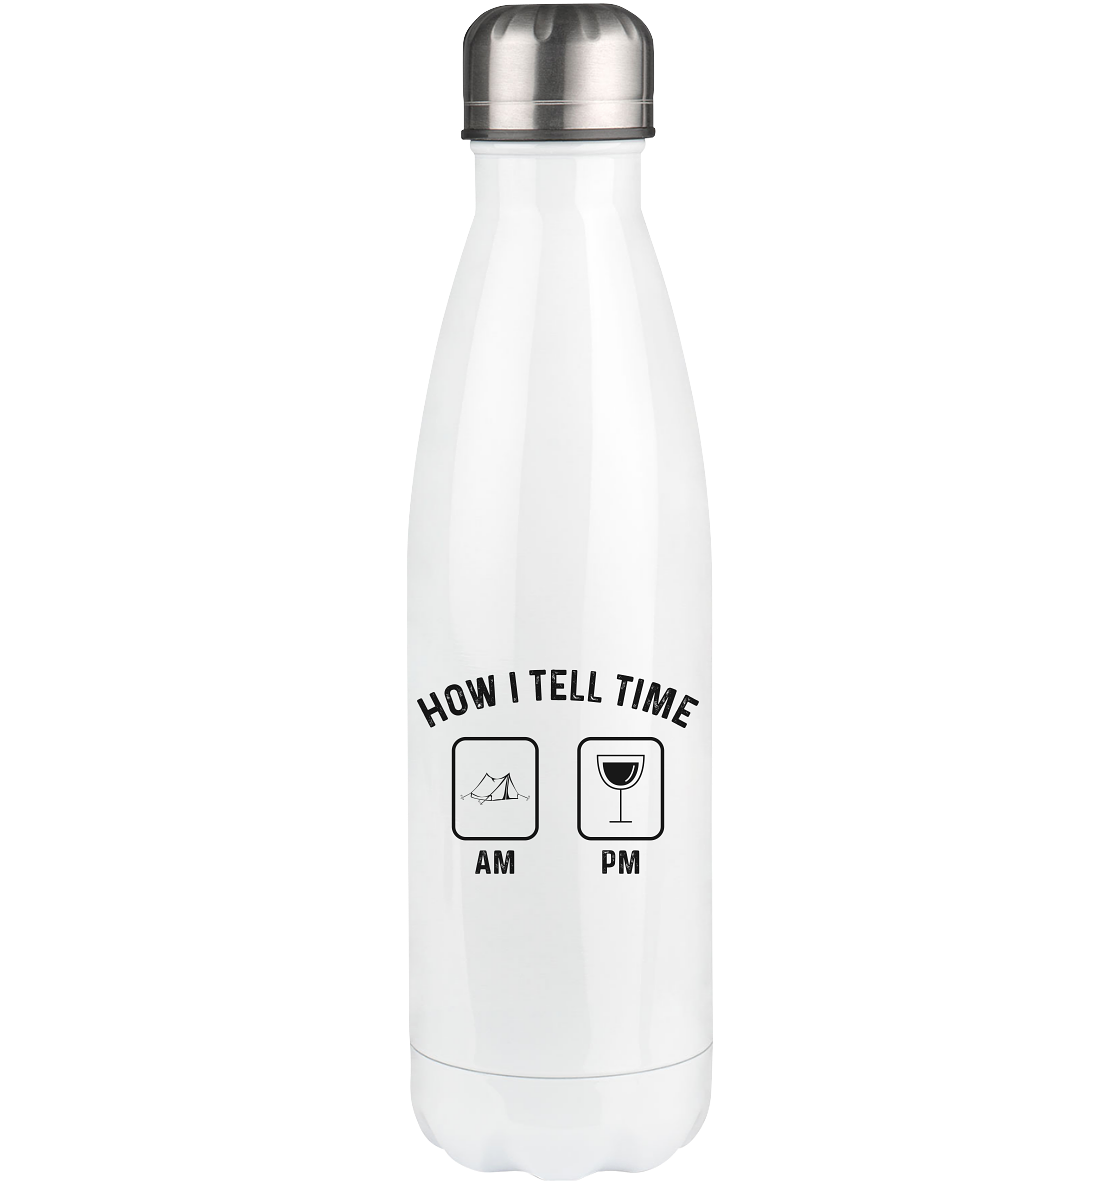 How I Tell Time Am Pm 1 - Edelstahl Thermosflasche camping UONP 500ml